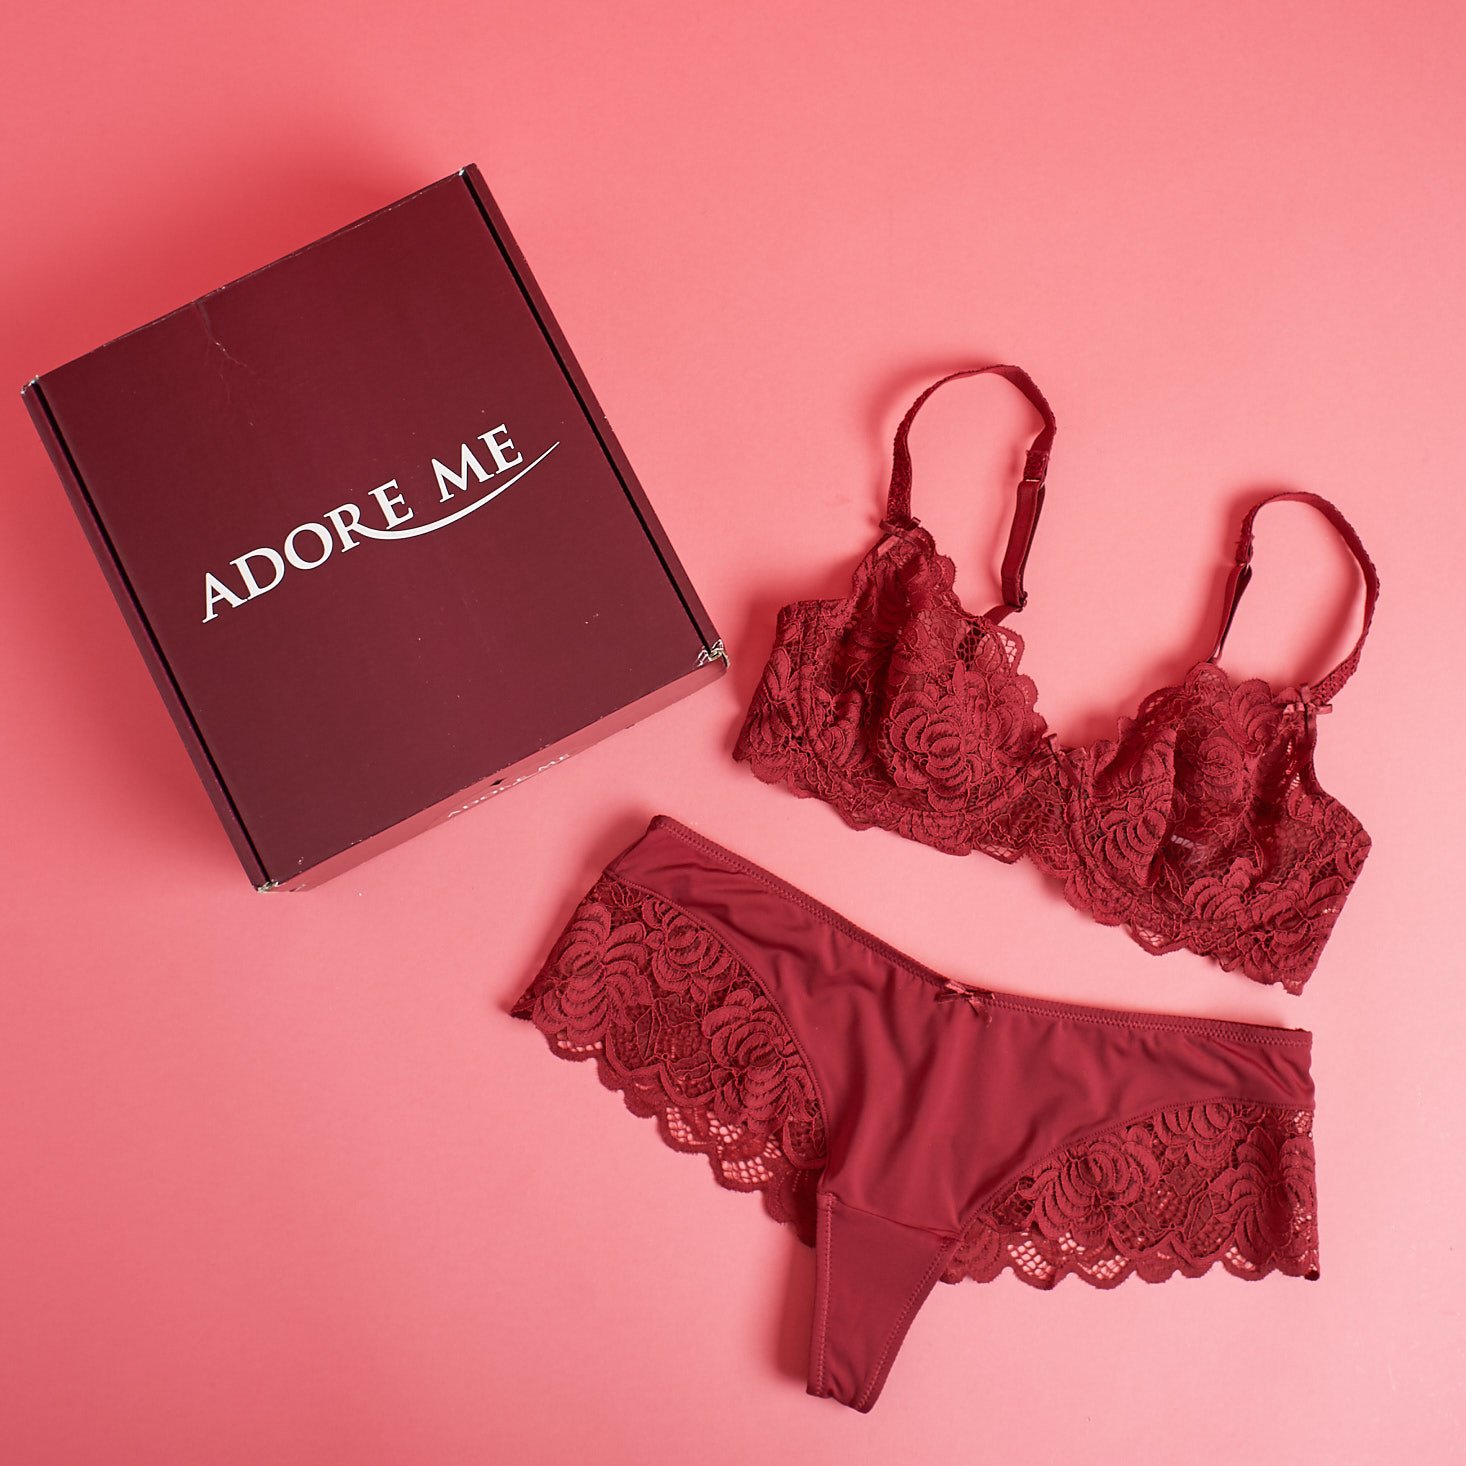 Adore Me Coupon: Get Free Lingerie